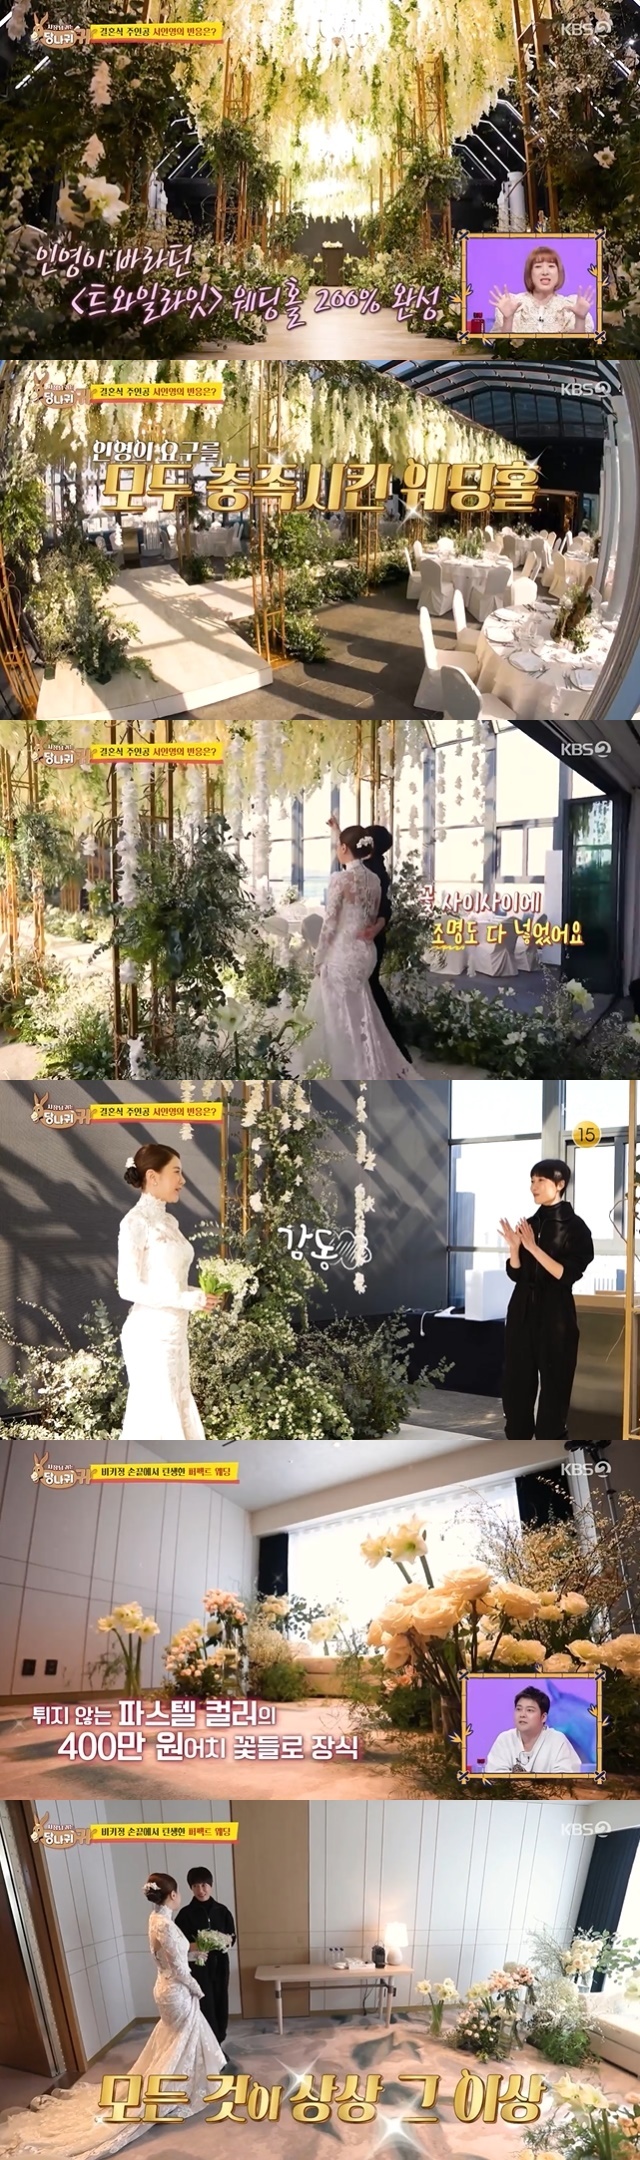 Seo In-young, a singer who uploaded a studded wedding ceremony, told a real honeymoon life.In the 202nd episode of KBS 2TVs entertainment show Boss in the Mirror (hereinafter referred to as Donkey Ears), which aired on April 9, a space designed to realize Seo In-youngs Wedding ceremony Romang, Miss Vicki Jung and her staff were depicted.On this day, Seo In-young found a studio called Donkey Ears as a space Desiigner Miss Vicki justice client.Seo In-young said that the charismatic past and style seemed to have changed a lot, saying, Husband is so opposite in character to me, he said.There is also a change in the style of clothes I like, but I have Laws, so I can not take it off like before.Seo In-young pointed out that she had a friend who ate late-night snacks with her as a good thing after marriage, but she said, The bad thing is that I get fat. She said, I gained 5kg.Husband took the initiative and said, Im long. (Husband) says, You win. You have a big voice. (Husband) is doing everything he wants.Im a bit unlucky sometimes, he said.This Seo in-young commissioned his own Wedding ceremony for 10 days in the space Desiigner Miss Vicki Justice Office.Seo In-young asked for a silver droplet flower bouquet that many stars such as Twilight wisteria flower and Ko So Young heard in their Wedding ceremony.It was a difficult request that was almost impossible, but on this day, Miss Vicki Jung in the VCR did her best to sell her own products to realize the Romang of Seo In-young.First, Miss Vicki Jung, who visited the flower market, showed a large order of flowers. She was surprised to explain that she was planning to make a space with a total of 4,000 steps and said, The Speech is a 100 million won wedding.The Speech of Seo In-youngs wedding was the silver droplet flower bouquet.The silver droplet flower was a flower that could be airlifted at least three weeks in advance by ordering overseas, so Miss Vicki Jung looked for staff and someone to order and find the remaining flowers, but could not get it.When asked if he thought silver droplets were such a difficult flower to obtain, Seo In-young replied, I just heard it (others). I didnt know it was that difficult.Still, after Miss Vicki Jung and staff struggled, Seo In-youngs Wedding ceremony finished The Speech safely.Miss Vicki Jung has been working hard to get a silver droplet flower in Japan a few days ago, and 50 staffs have been working 10 hours before the wedding ceremony to decorate the ceremony beautifully.At this time, Miss Vicki Jung attracted attention with her nagging and pressuring staff. Seo In-young is like our Husband because she can not easily press the button because she knows Miss Vickis efforts.I think Im horny, he recalled his Husband, who nagged for three hours.Seo In-young confessed to MCs that he was already confused by Husband, Yes, I am often confused, and nodded silently to the suspicions of I bought a Guddu and With my brothers card?I start with I dont say anything about living, and I tell the whole story about economic ideas from beginning to end. Its very long, he said of Husbands nagging style.In the VCR, Seo In-youngs Wedding ceremony, which was held privately, was revealed.Seo In-young said to Miss Vicki Jung, who gave me the Speech in a short time, I am so impressed. I made it into a dream wedding ceremony. Thank you.Wedding ceremony seems to be perfect and happy to live well. In addition, Seo In-young also revealed the fact that he was in The Speech.